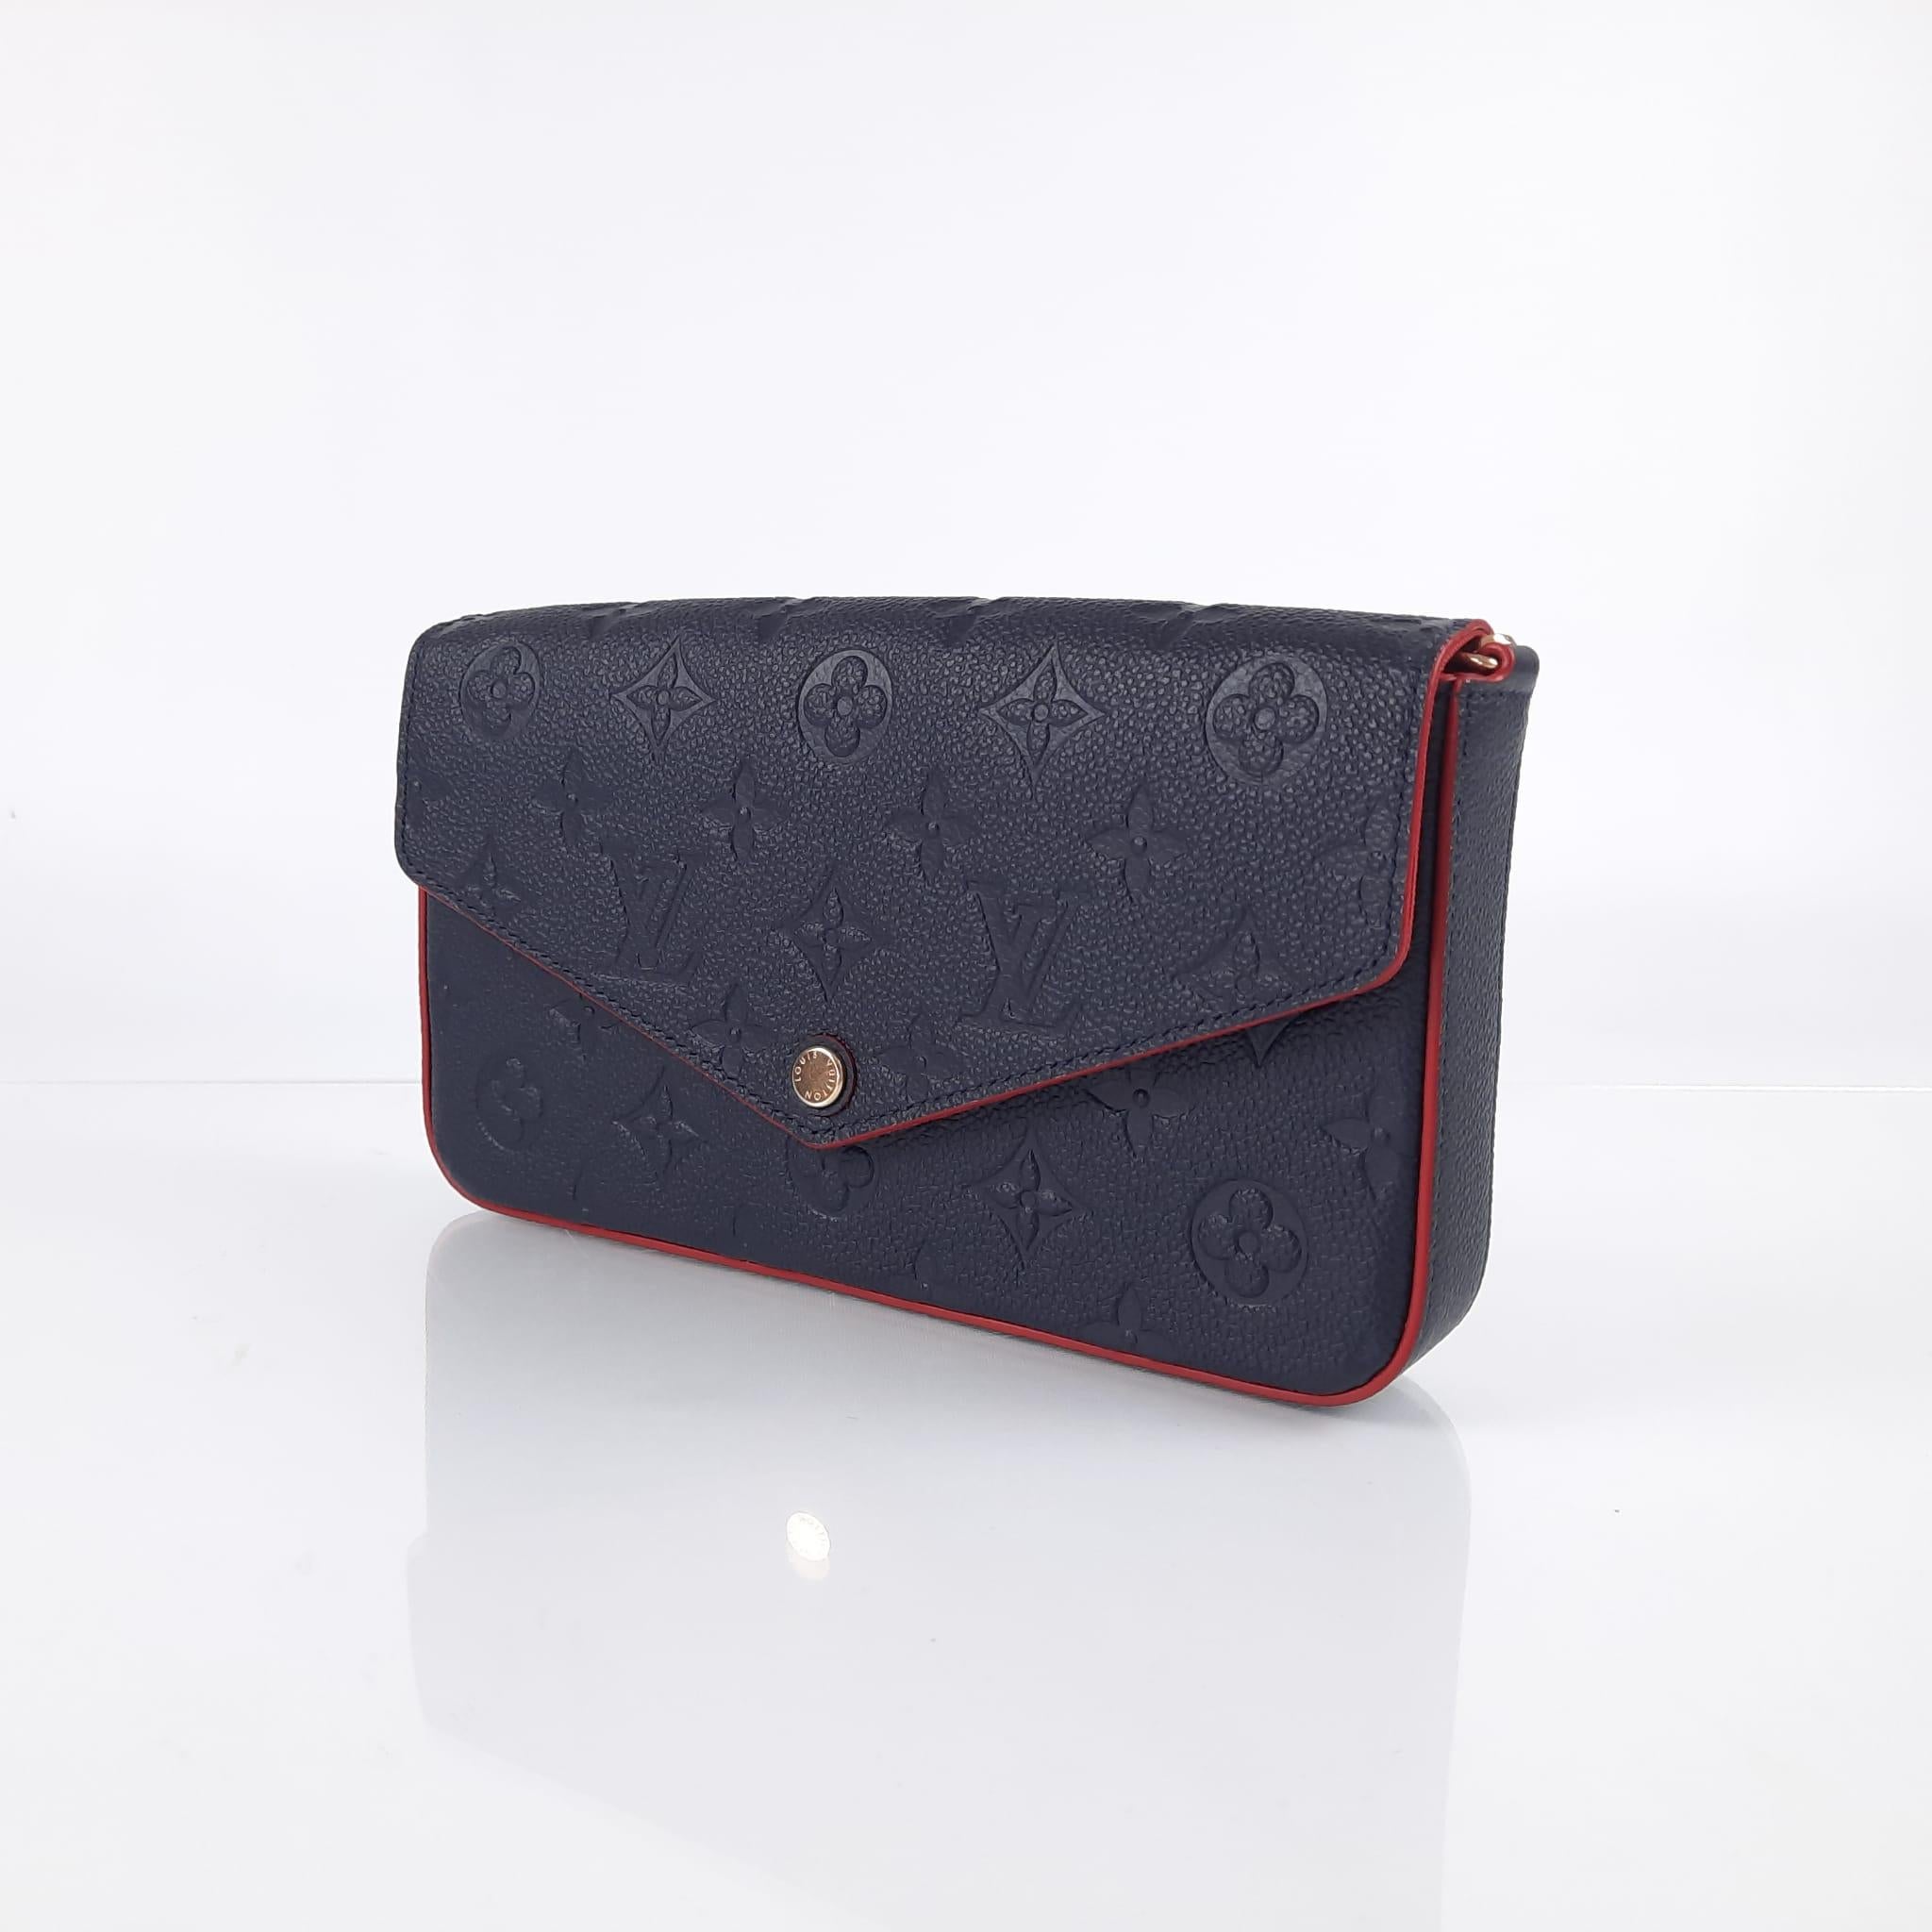 Navy Blue/Red
Monogram Empreinte embossed supple grained cowhide leather
Supple grained cowhide leather trim
Textile lining
Gold-colour hardware
Press stud closure
Large compartment
Removable zipped pocket
Removable flat pocket with 8 card